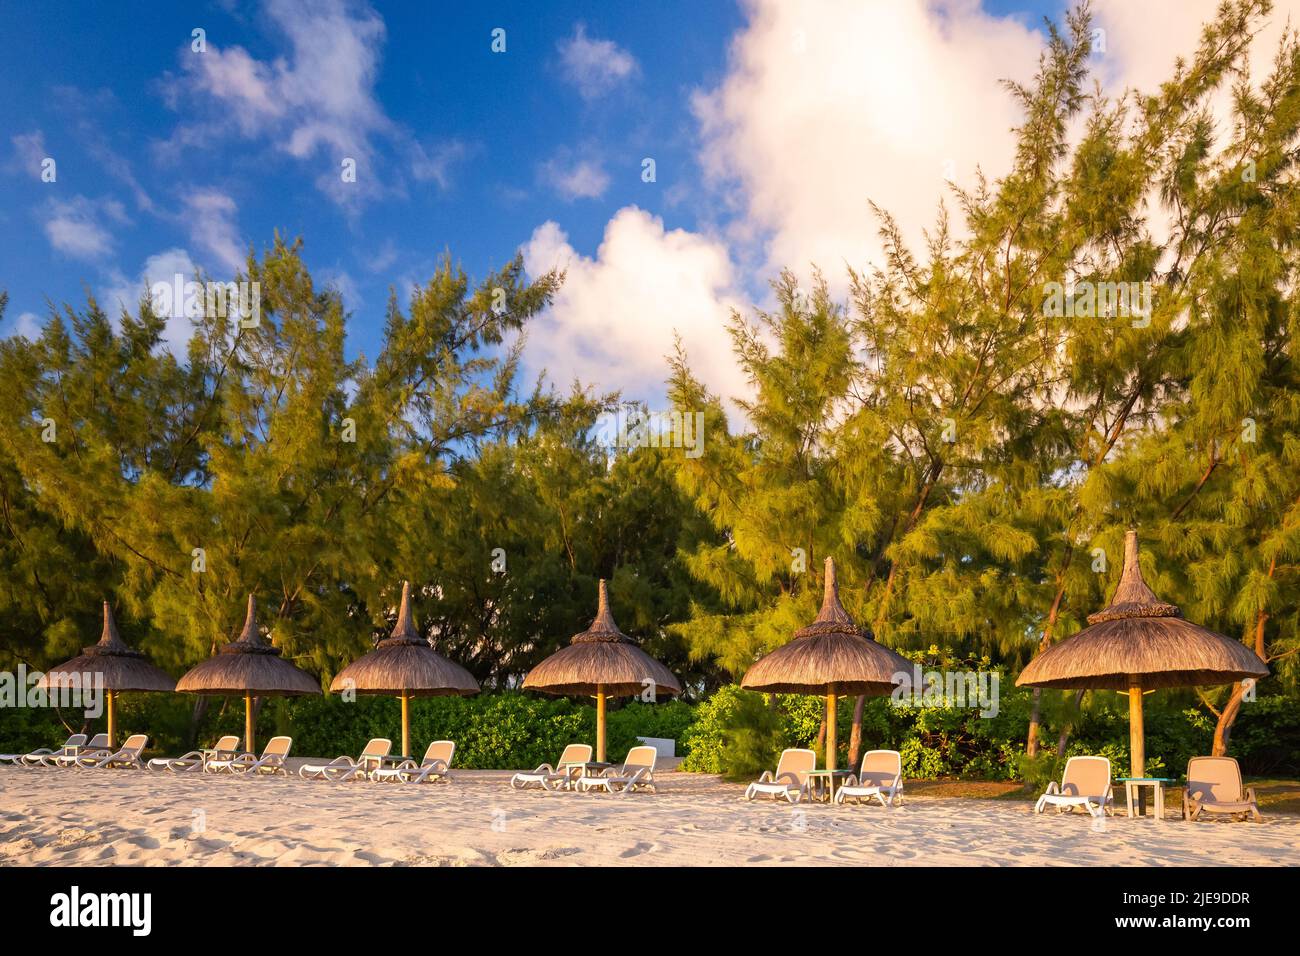 Public beach with lounge chairs and umbrellas, Mauritius island, Africa Stock Photo